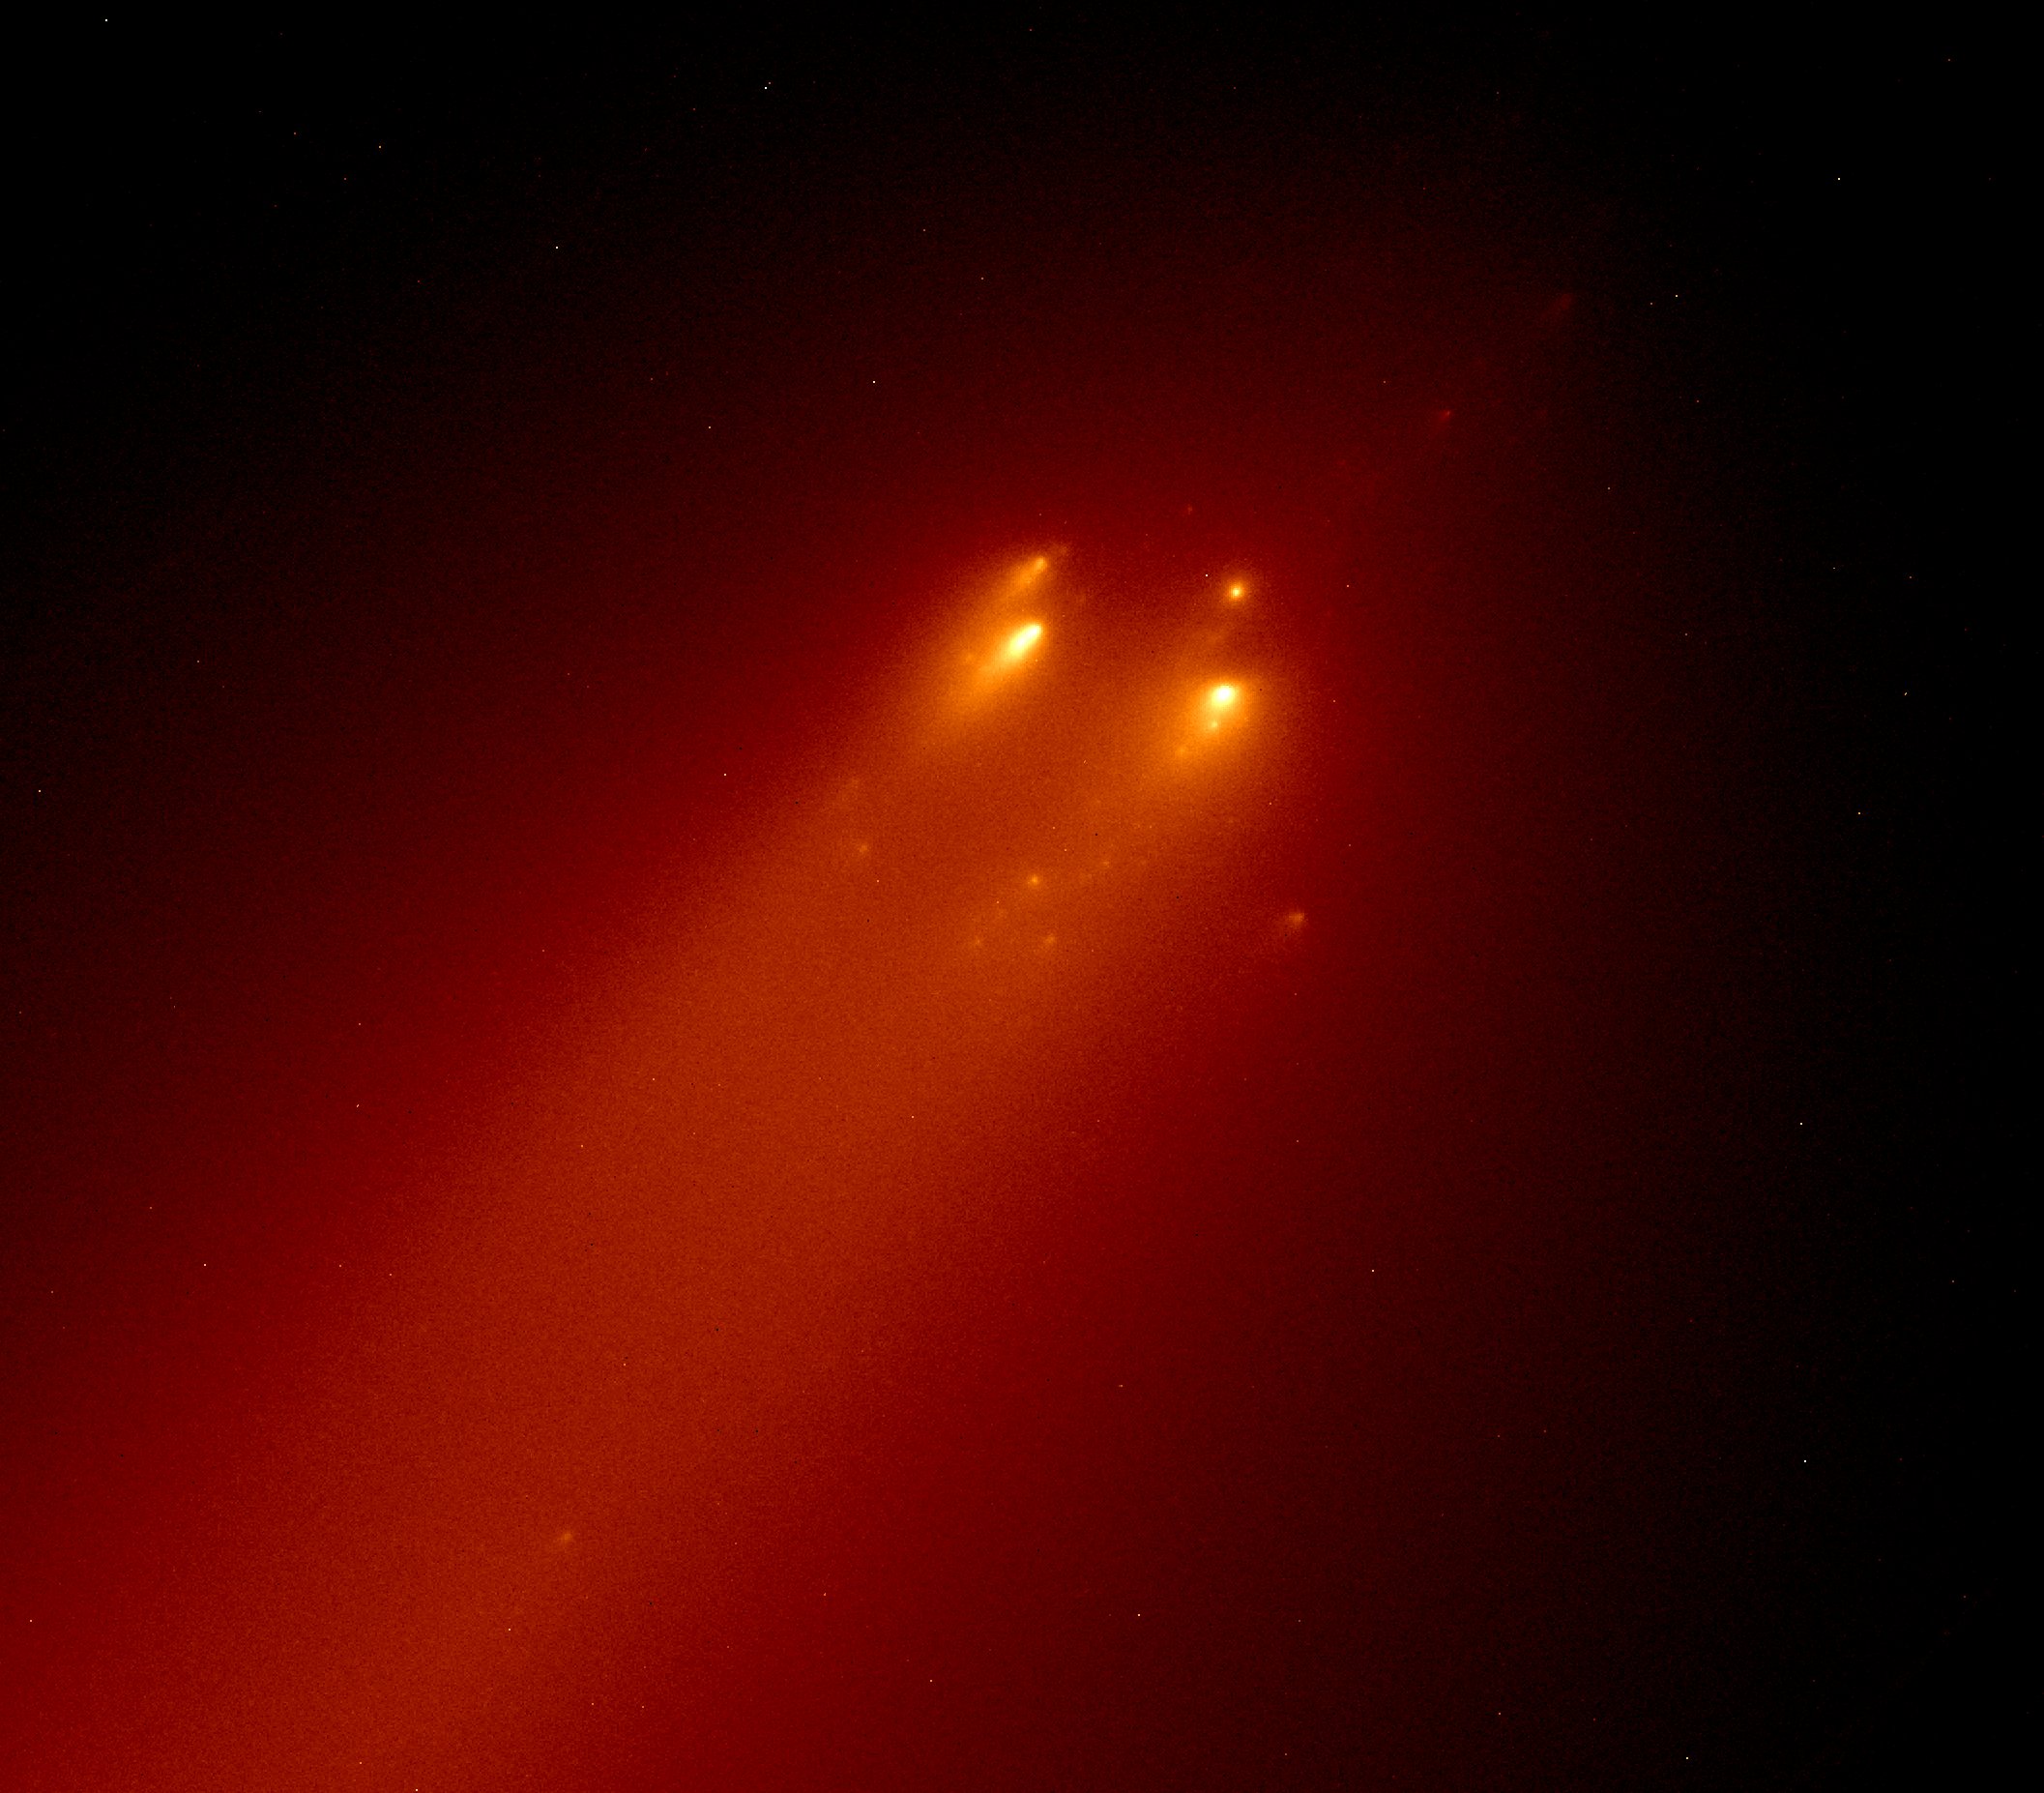 Detail of the fragments of the comet C/2019 Y4 (ATLAS) observed with the Hubble Space Telescope on 20th April, 2020 (David Hewitt, HST, NASA, ESA).